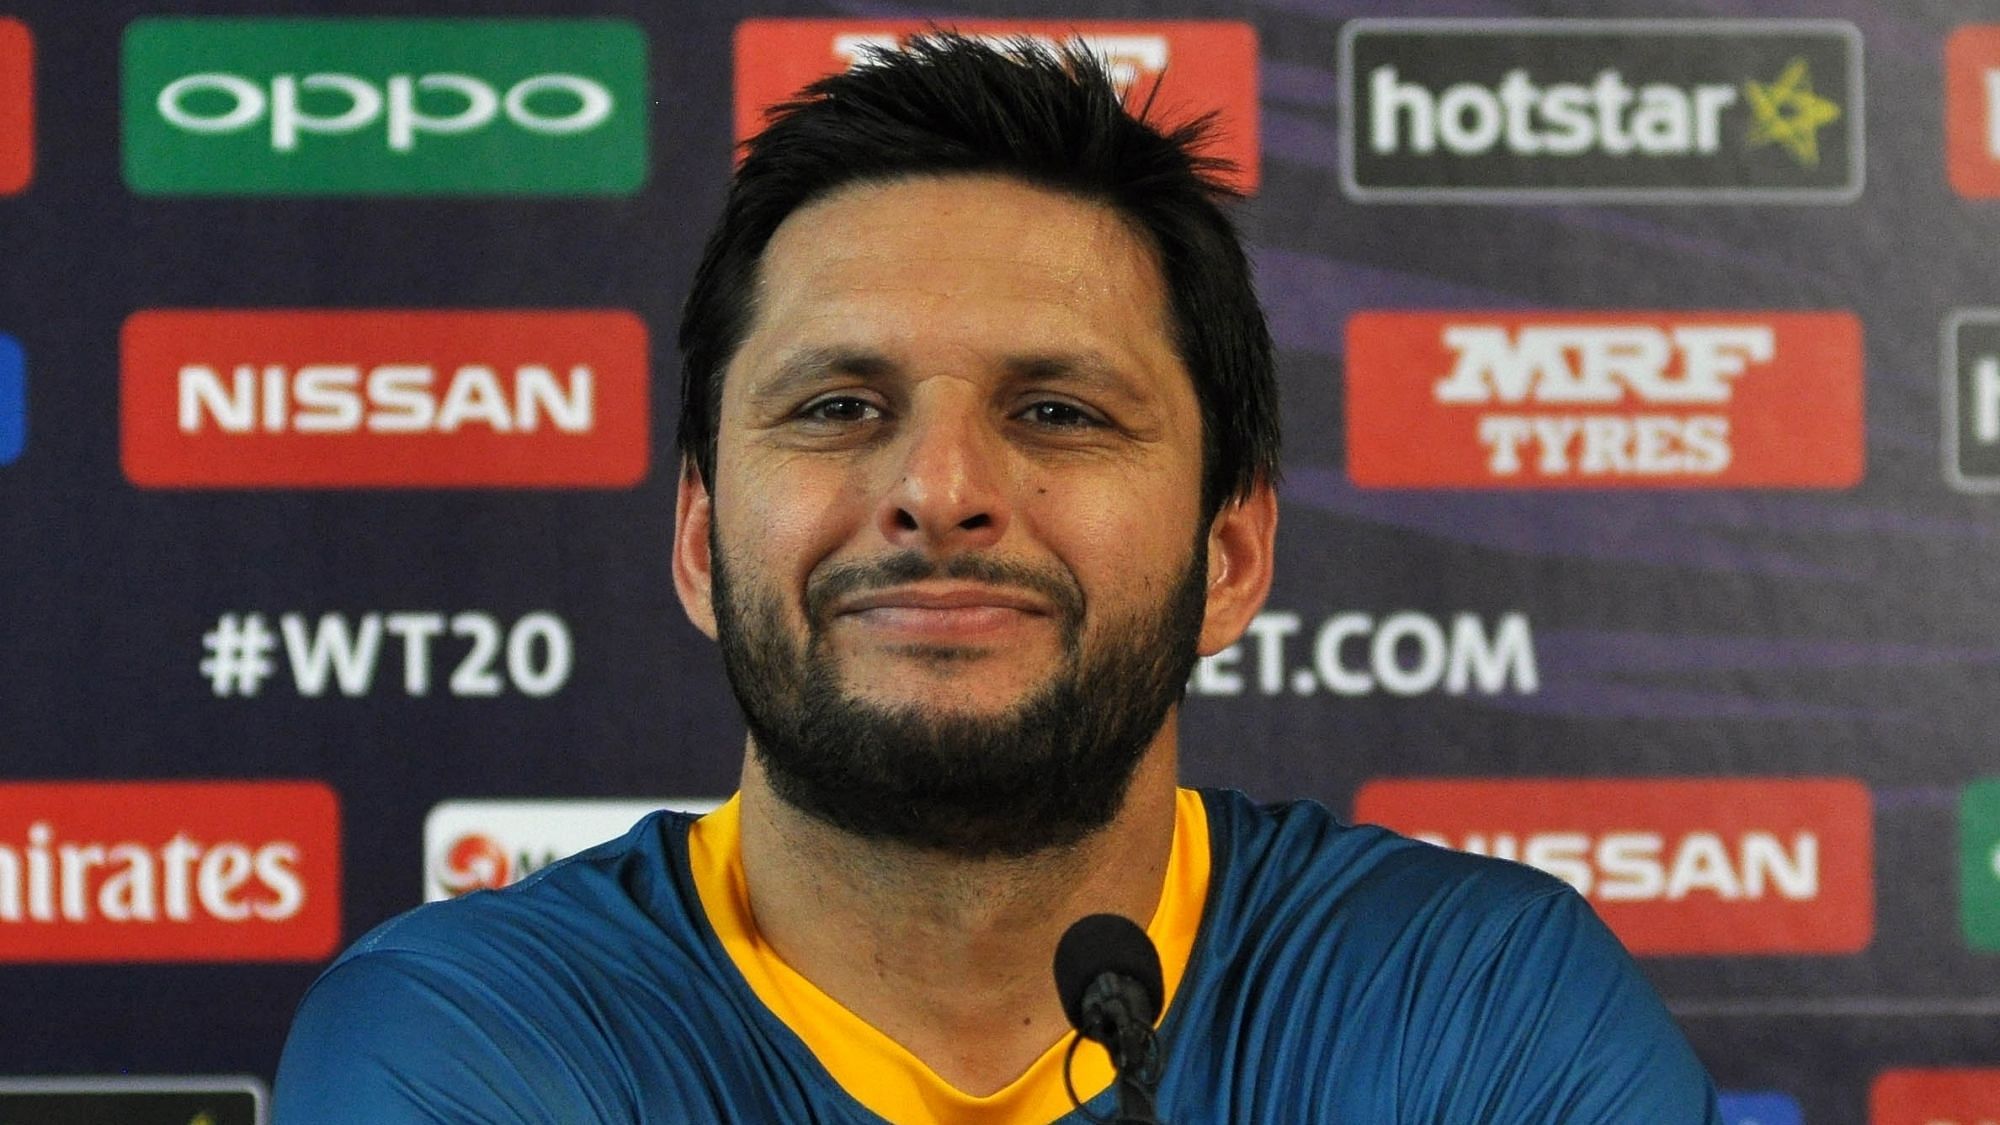 Former Pakistan skipper Shahid Afridi has once again come out with an outrageous claim, stating that people in India are being oppressed.